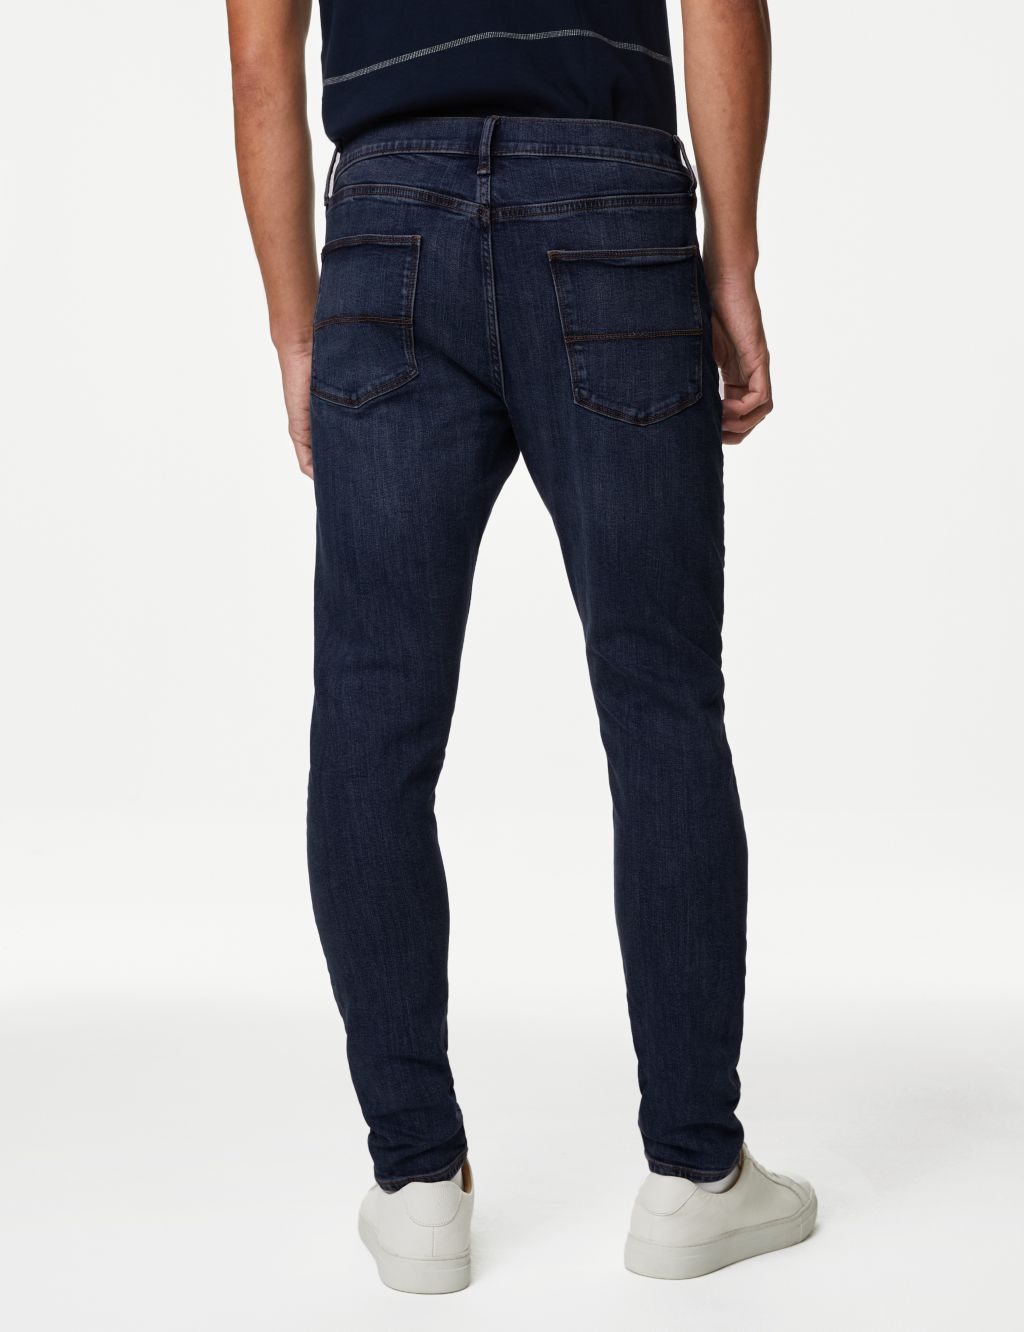 Skinny Fit Stretch Jeans image 4